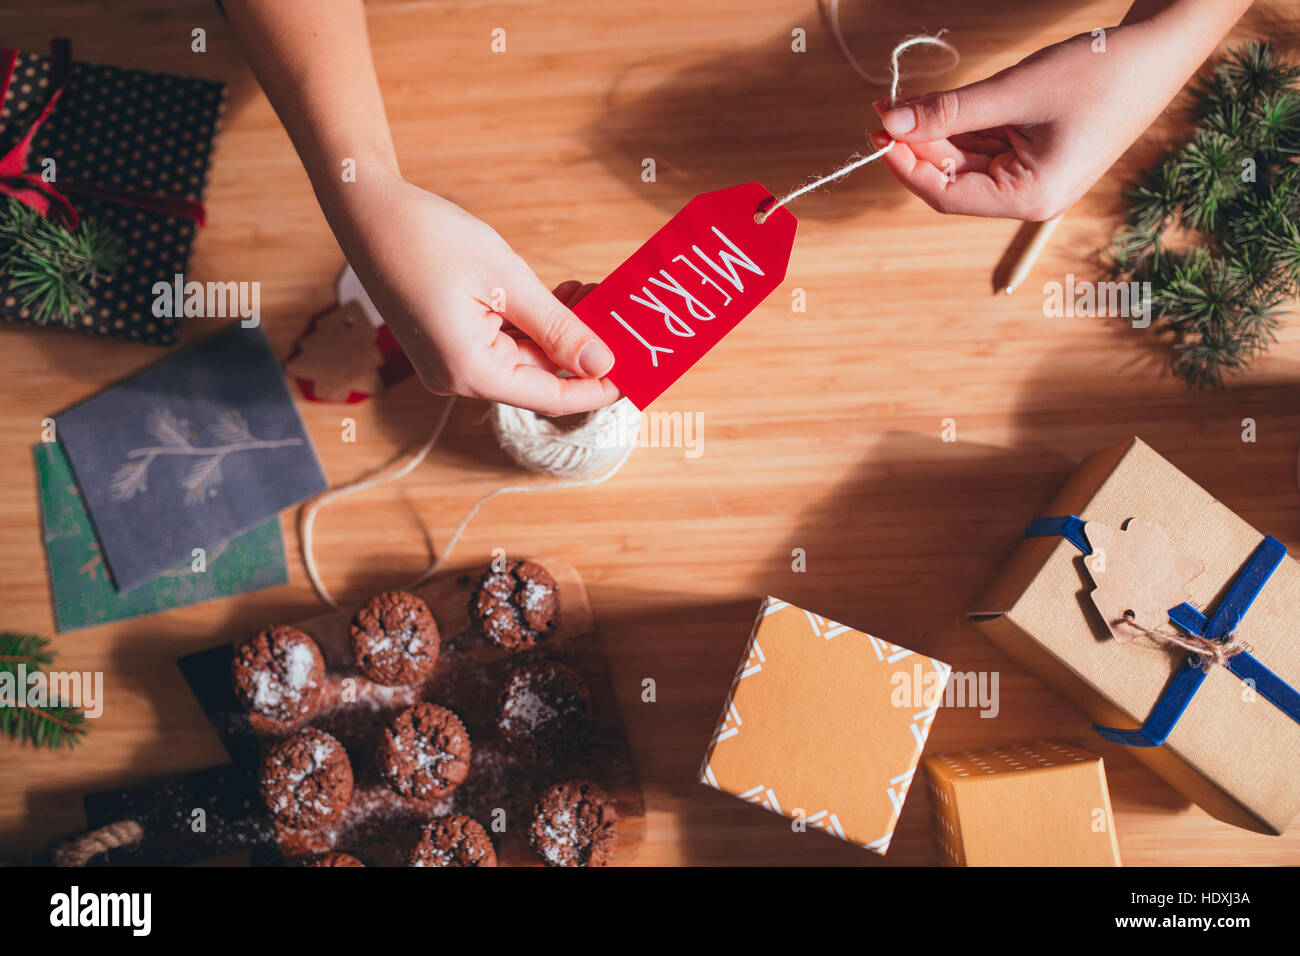 Woman wrapping and decorating Christmas present Stock Photo